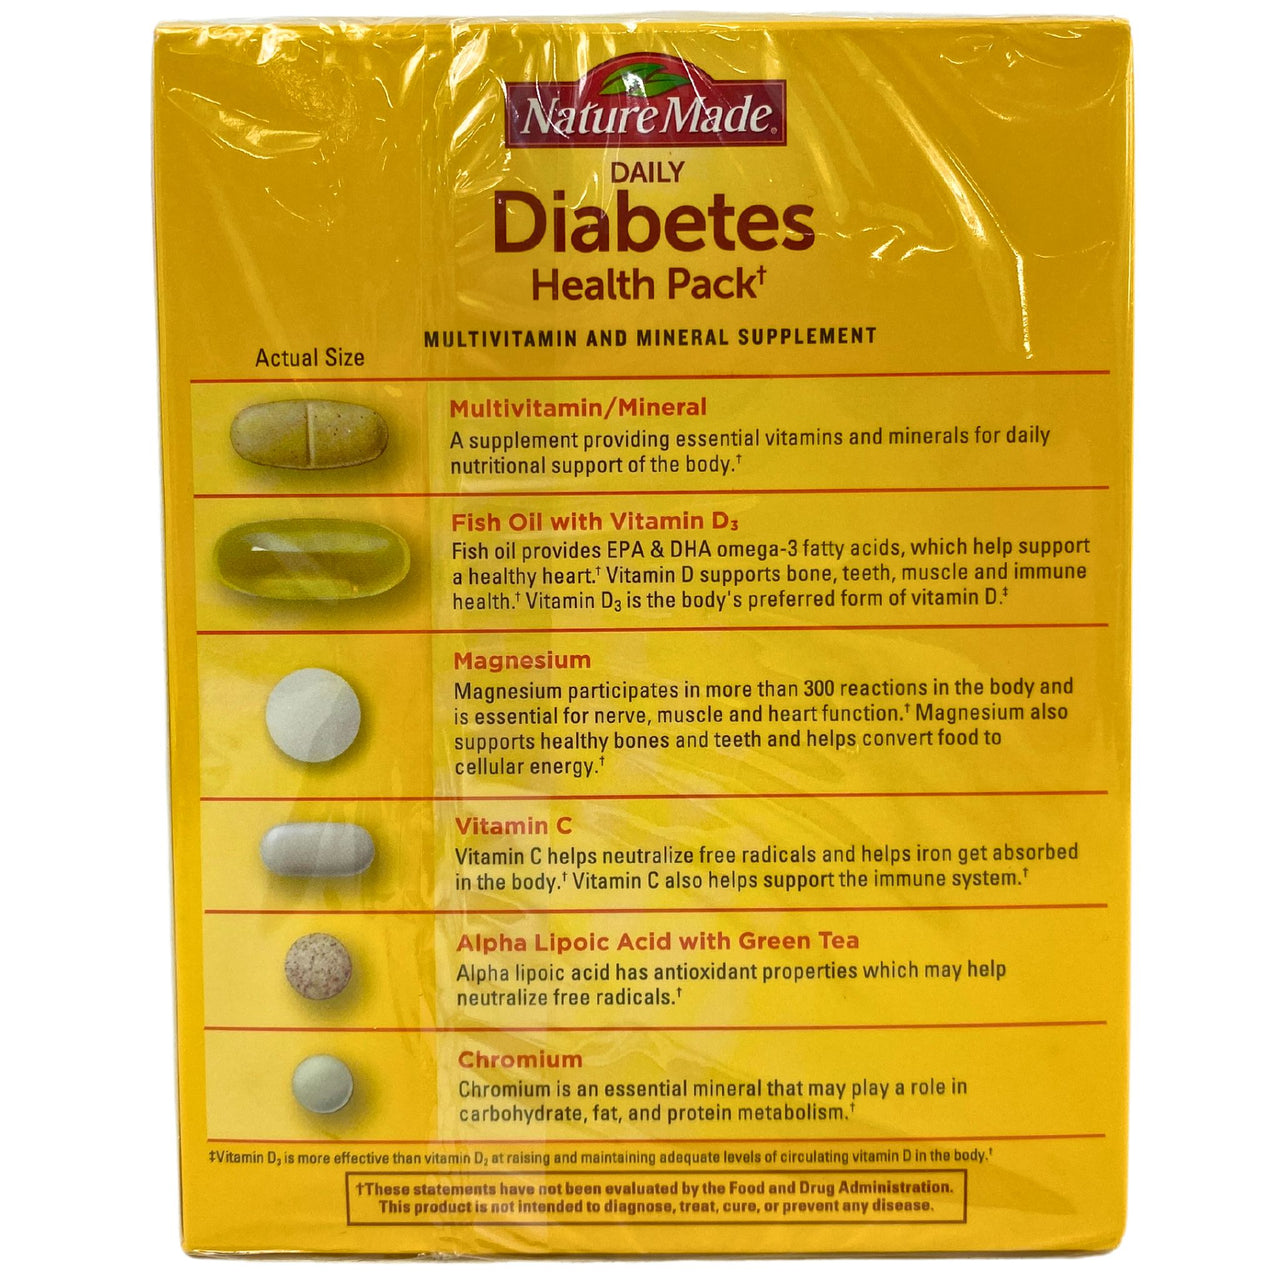 Nature Made Daily Diabetes Health Pack